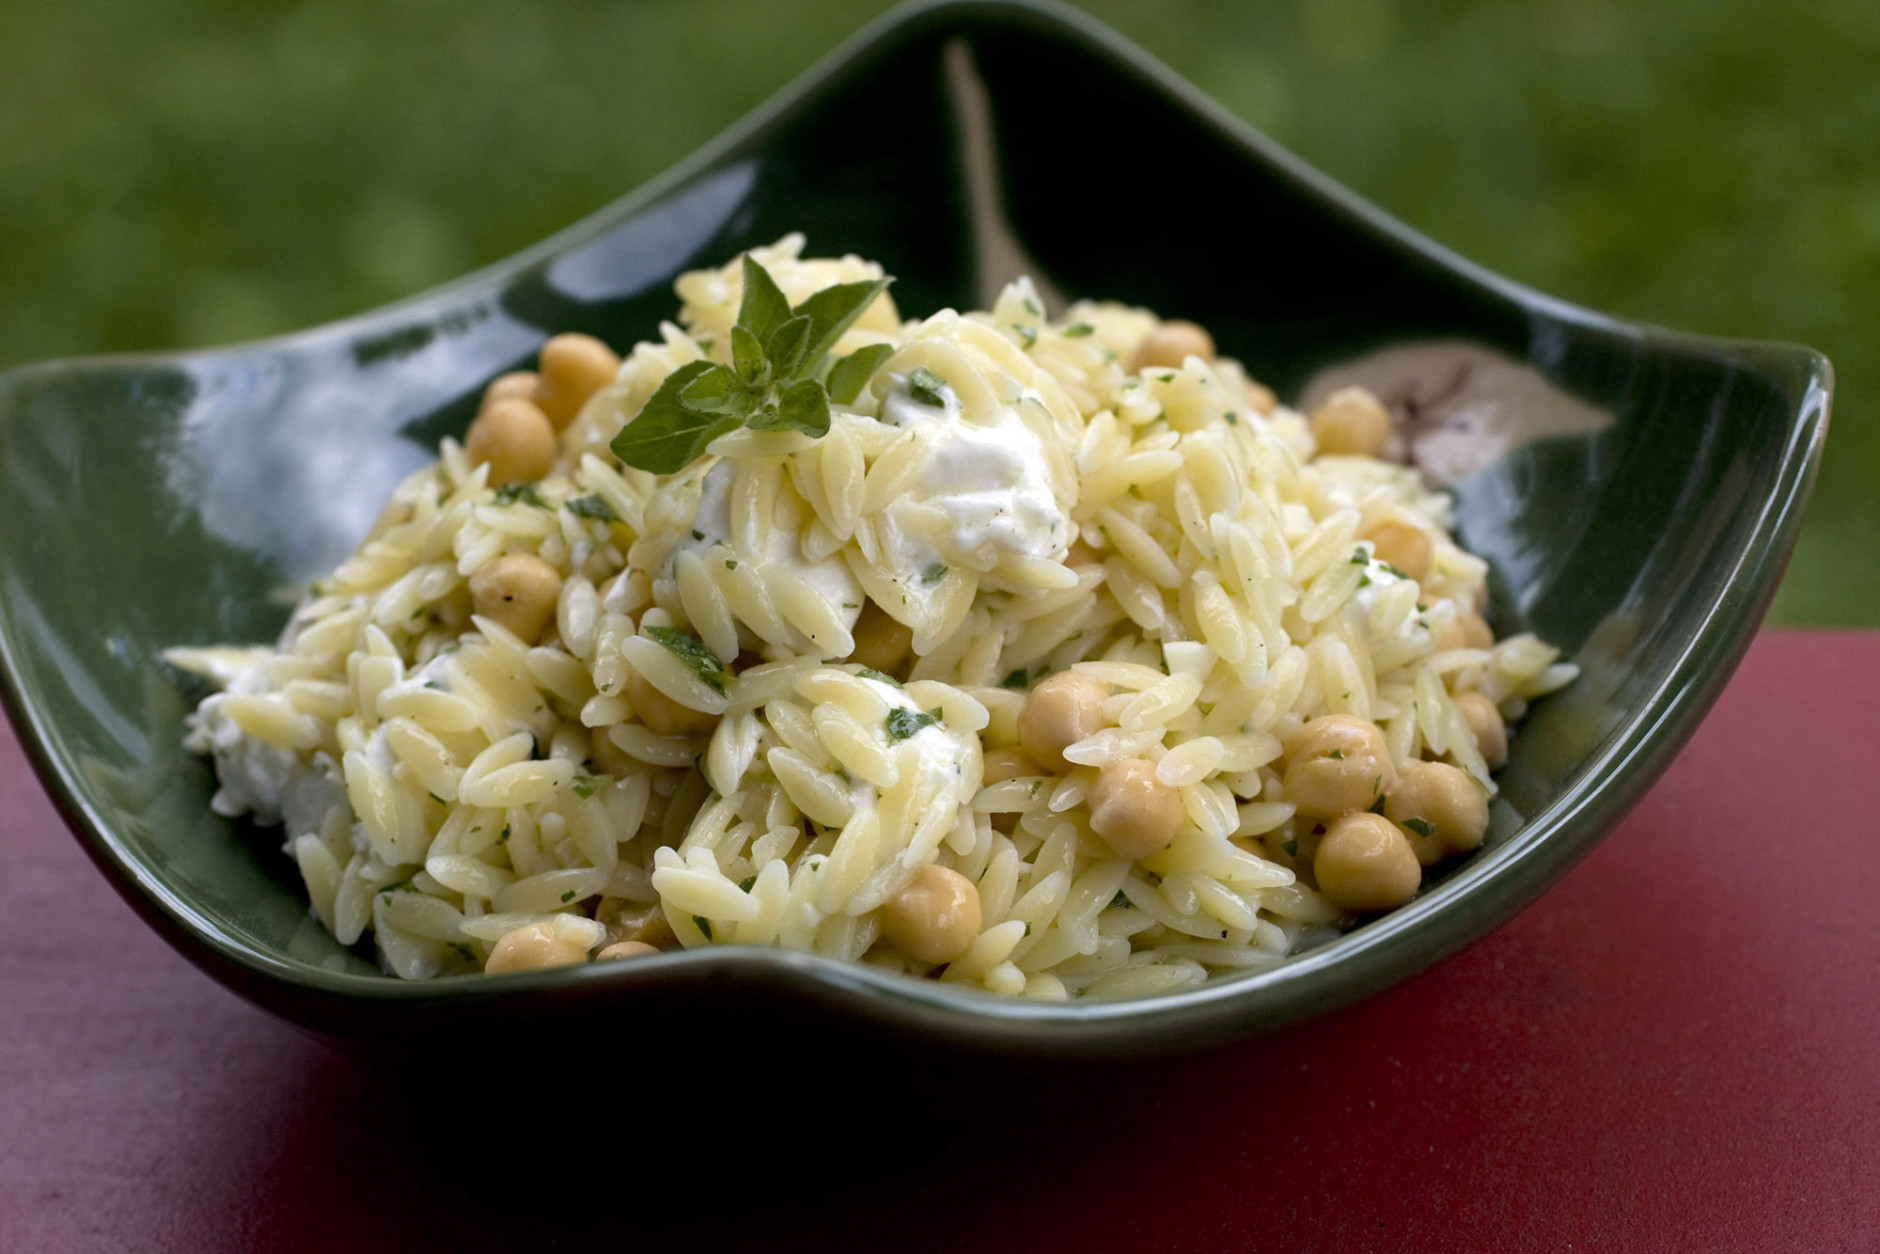 **FOR USE WITH AP LIFESTYLES**   This Sunday, June 1, 2008 photo shows a bowl of Orzo with Chickpeas. This simple dish is a Mediterranean take on pasta salad, blending rice-like orzo pasta with chickpeas and goat cheese. It can be served warm or at room temperature.   (AP Photo/Larry Crowe)